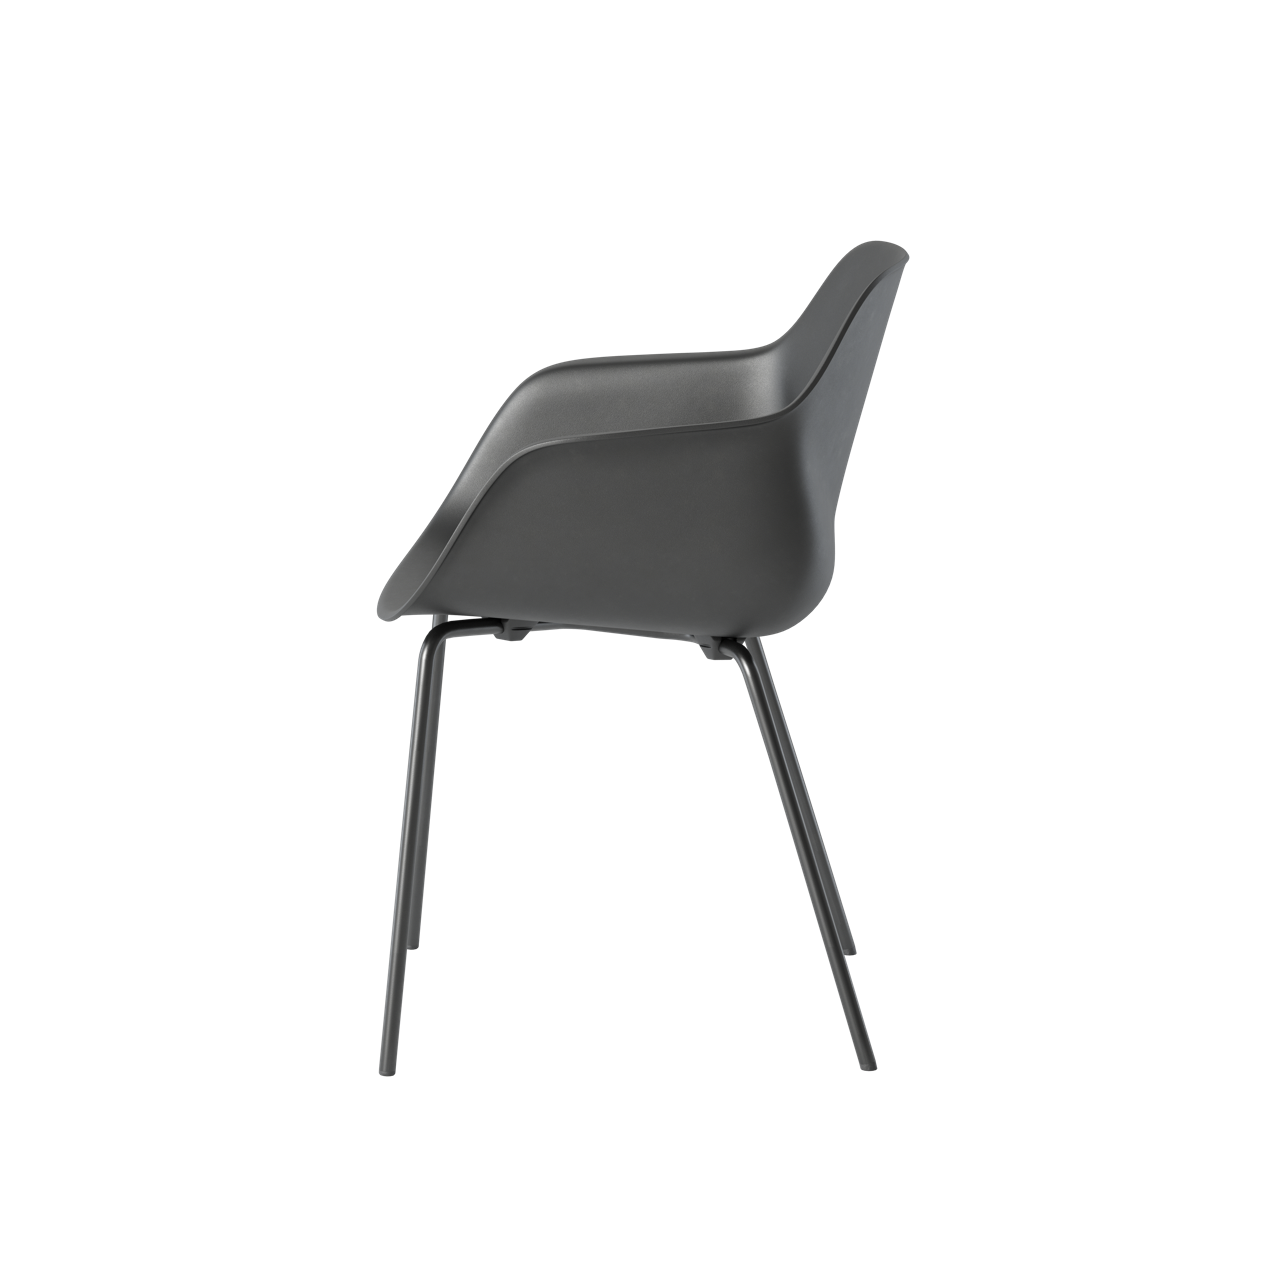 OCEE&FOUR – Chairs – FourMe 44 – Plastic Shell - Packshot Image 2 Large